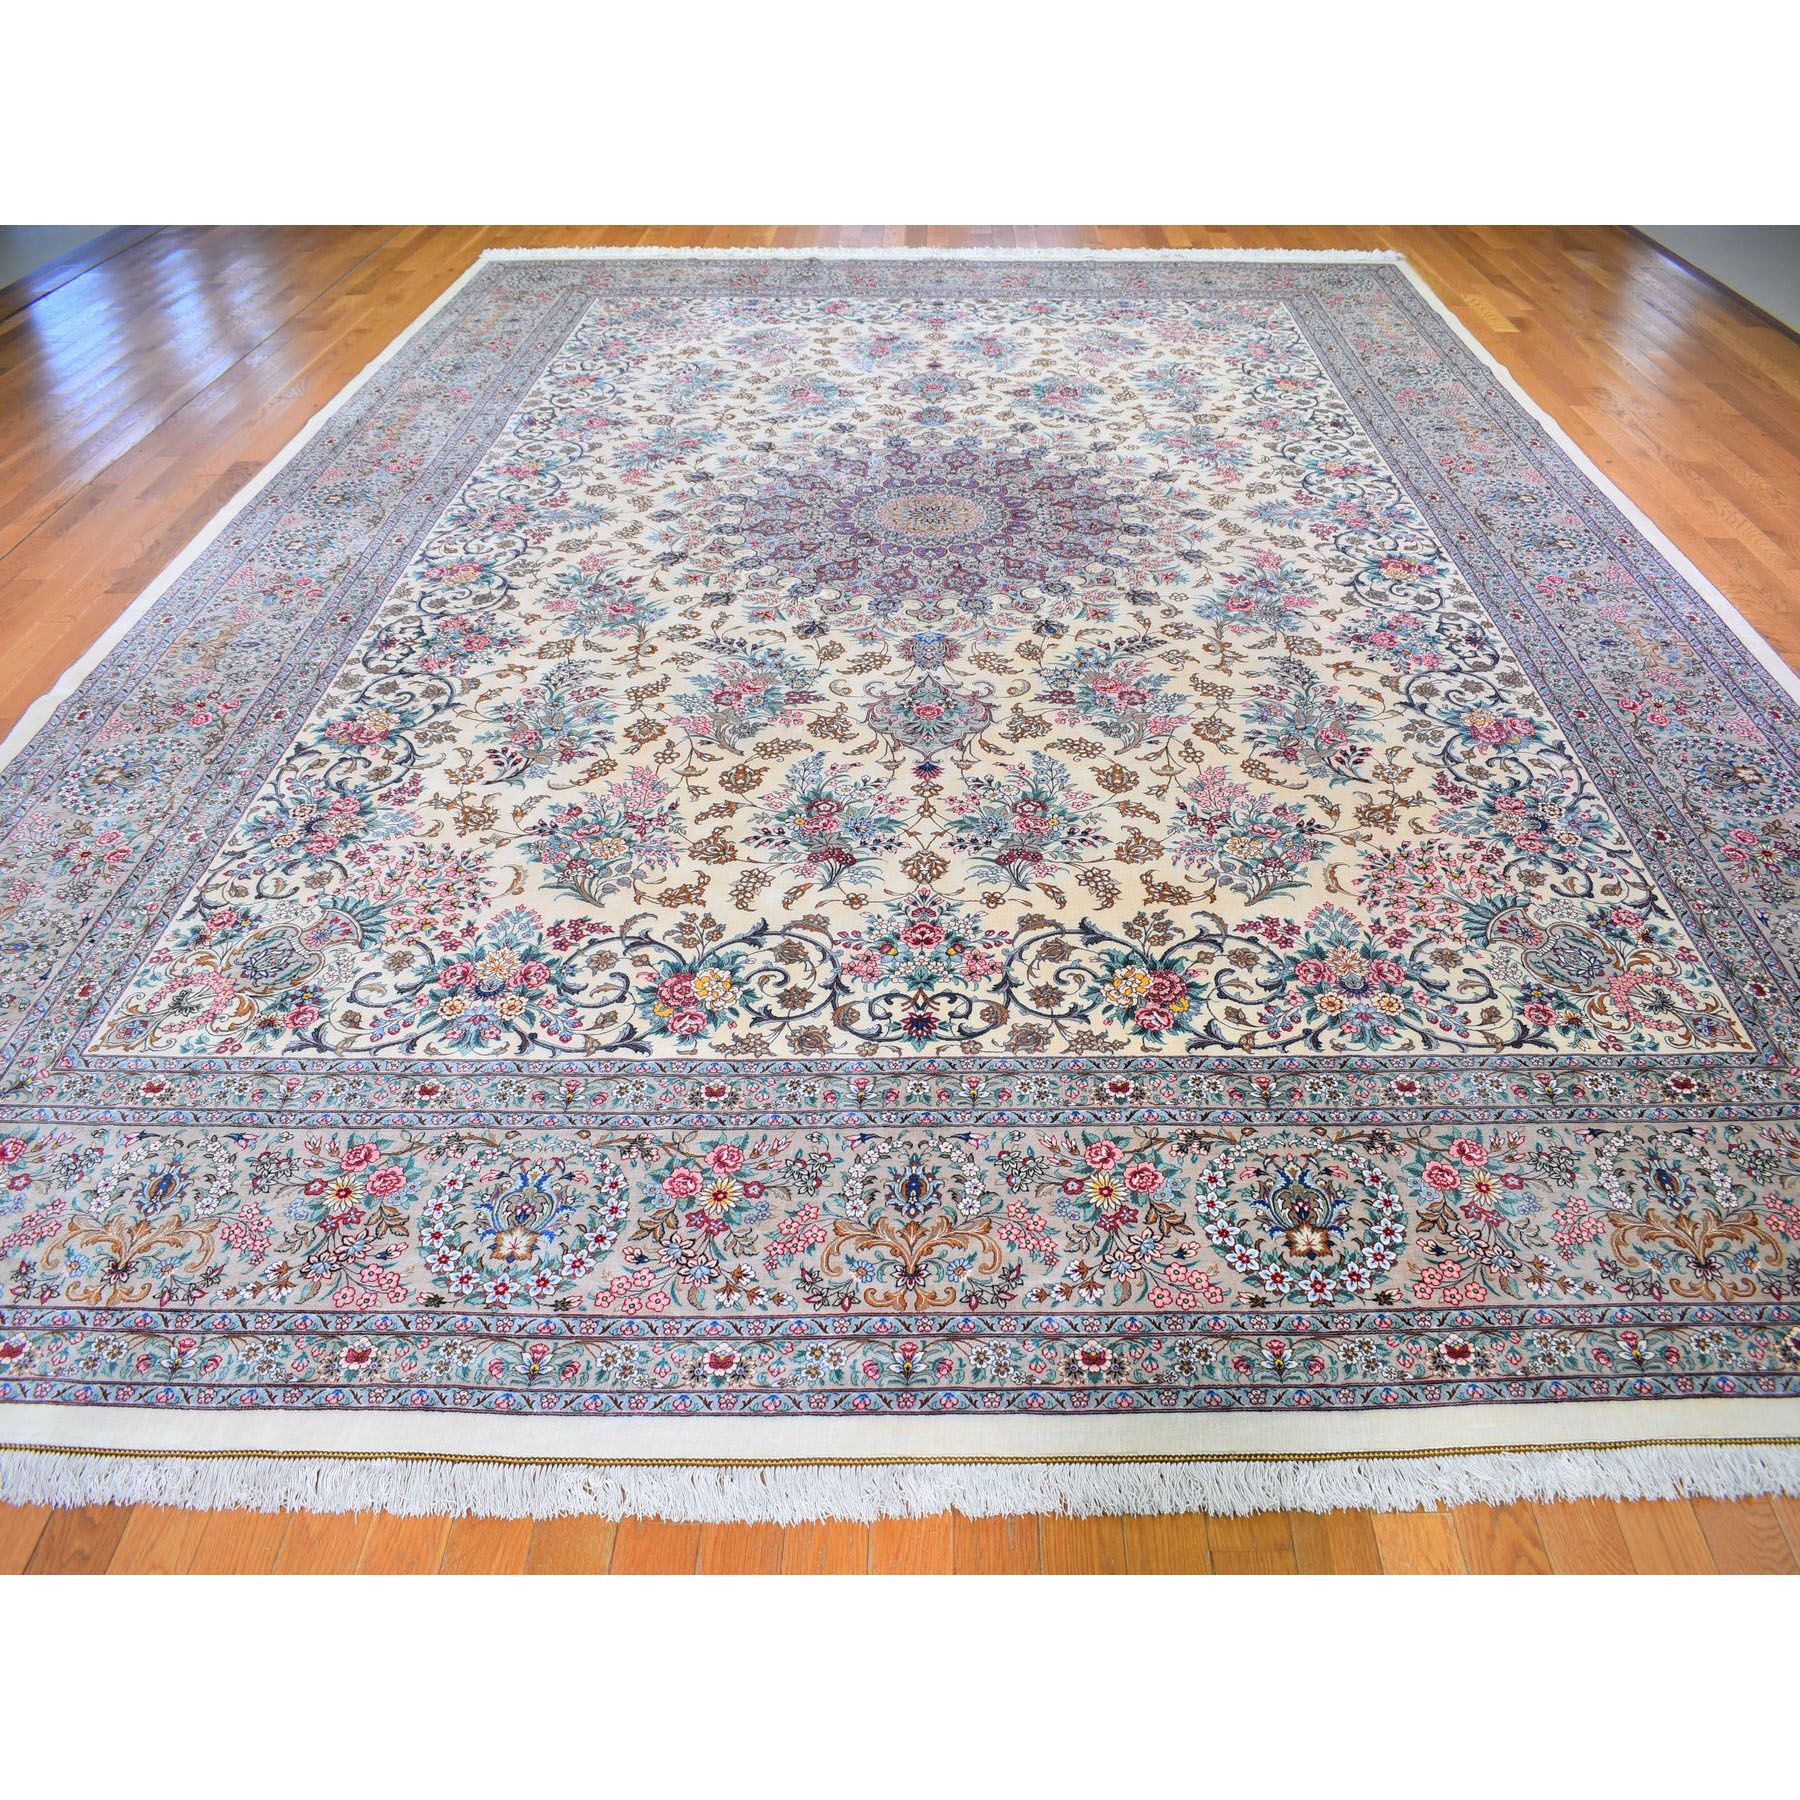 11-1 x14-9  Ivory Oversized New Persian Qom Pure Silk 600 KPSI Signed Hand Knotted Oriental Rug 